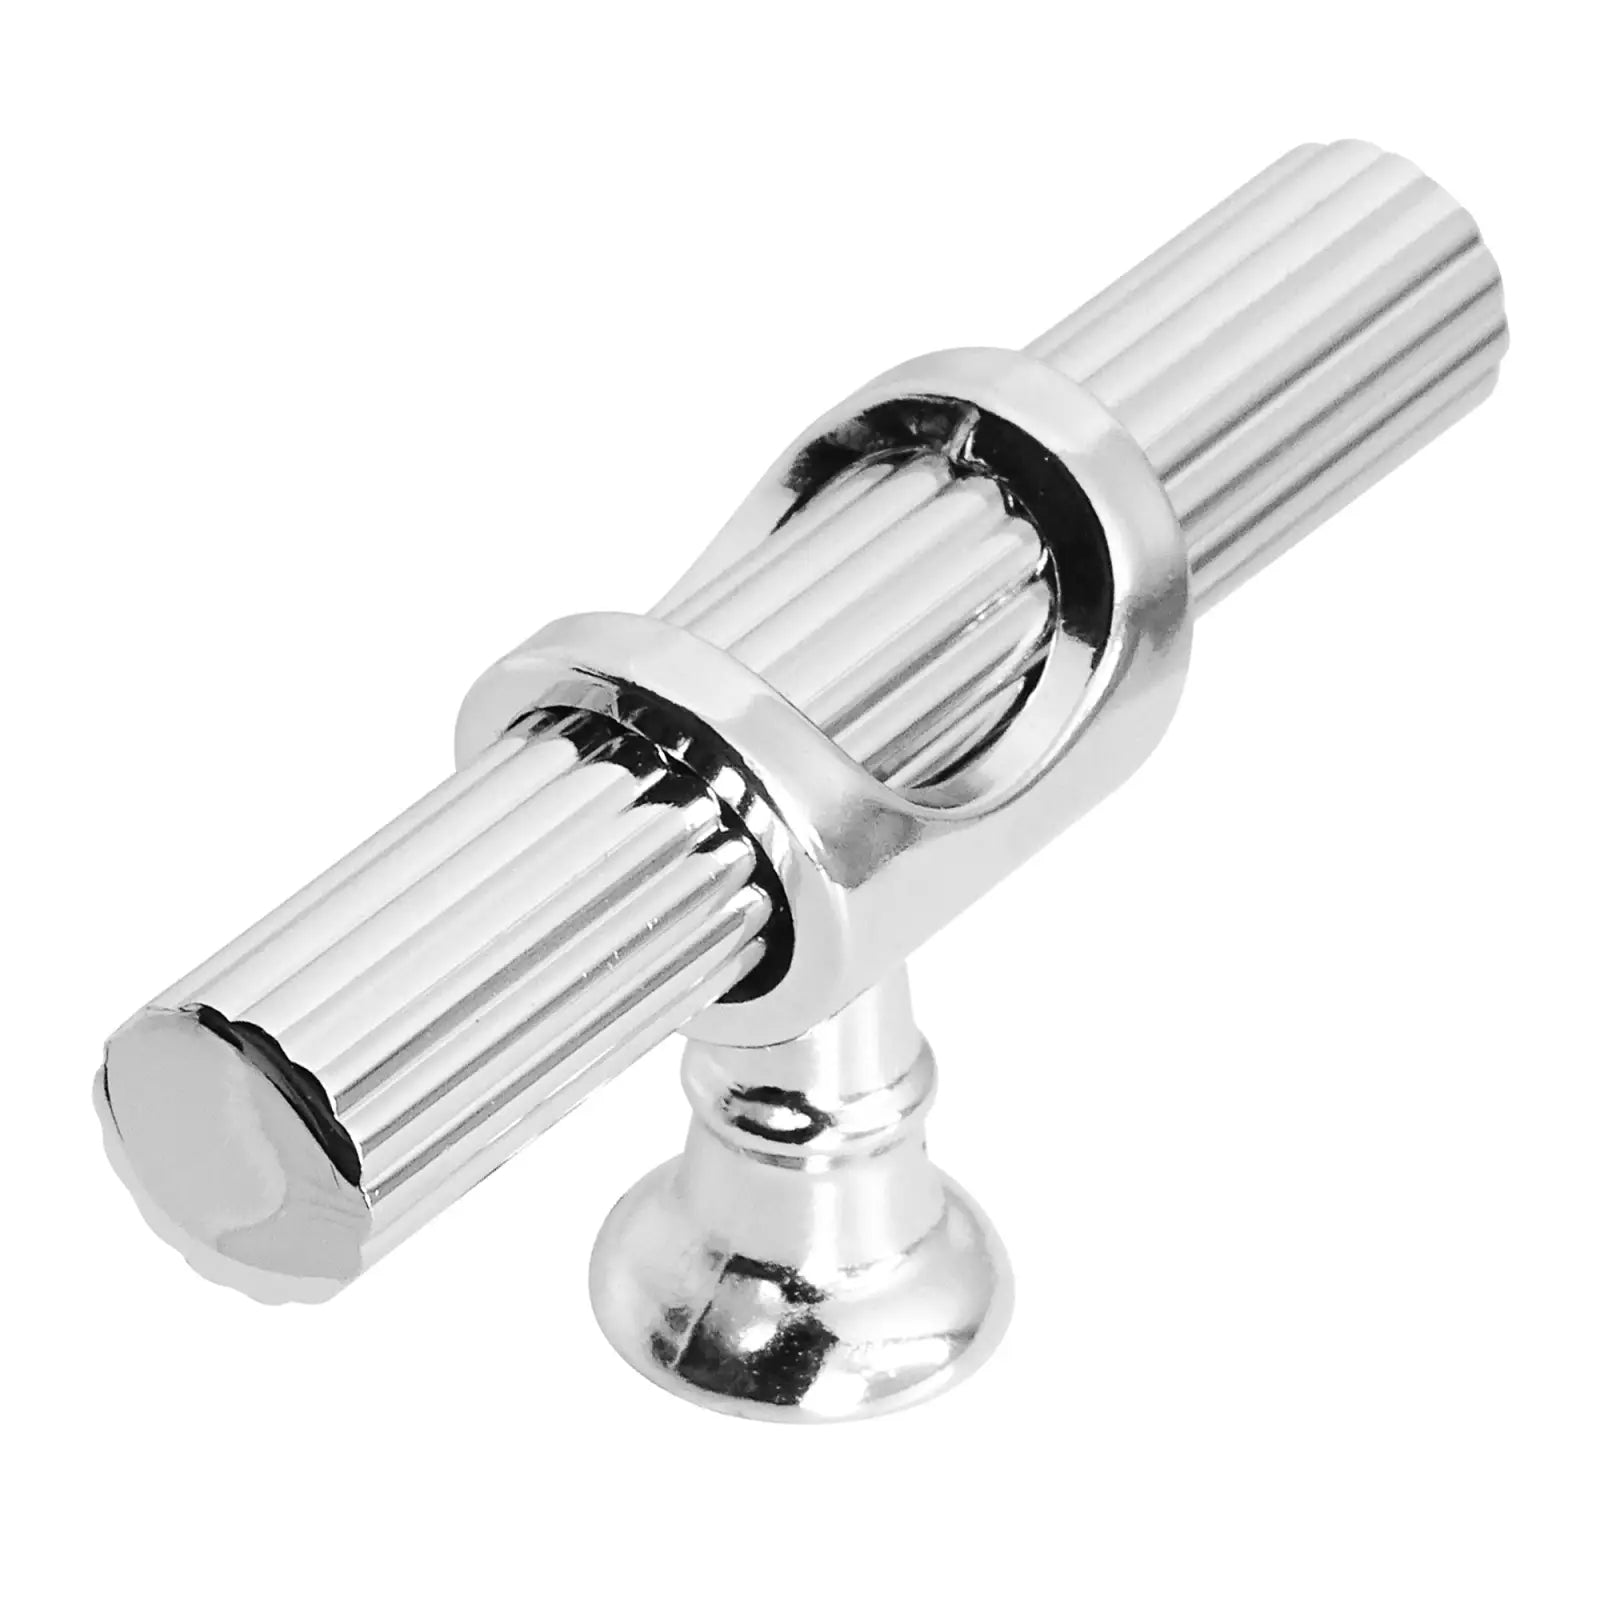 Sienna - Lines Knurled T-Bar Kitchen Cabinet Pull Knob - Polished Chrome